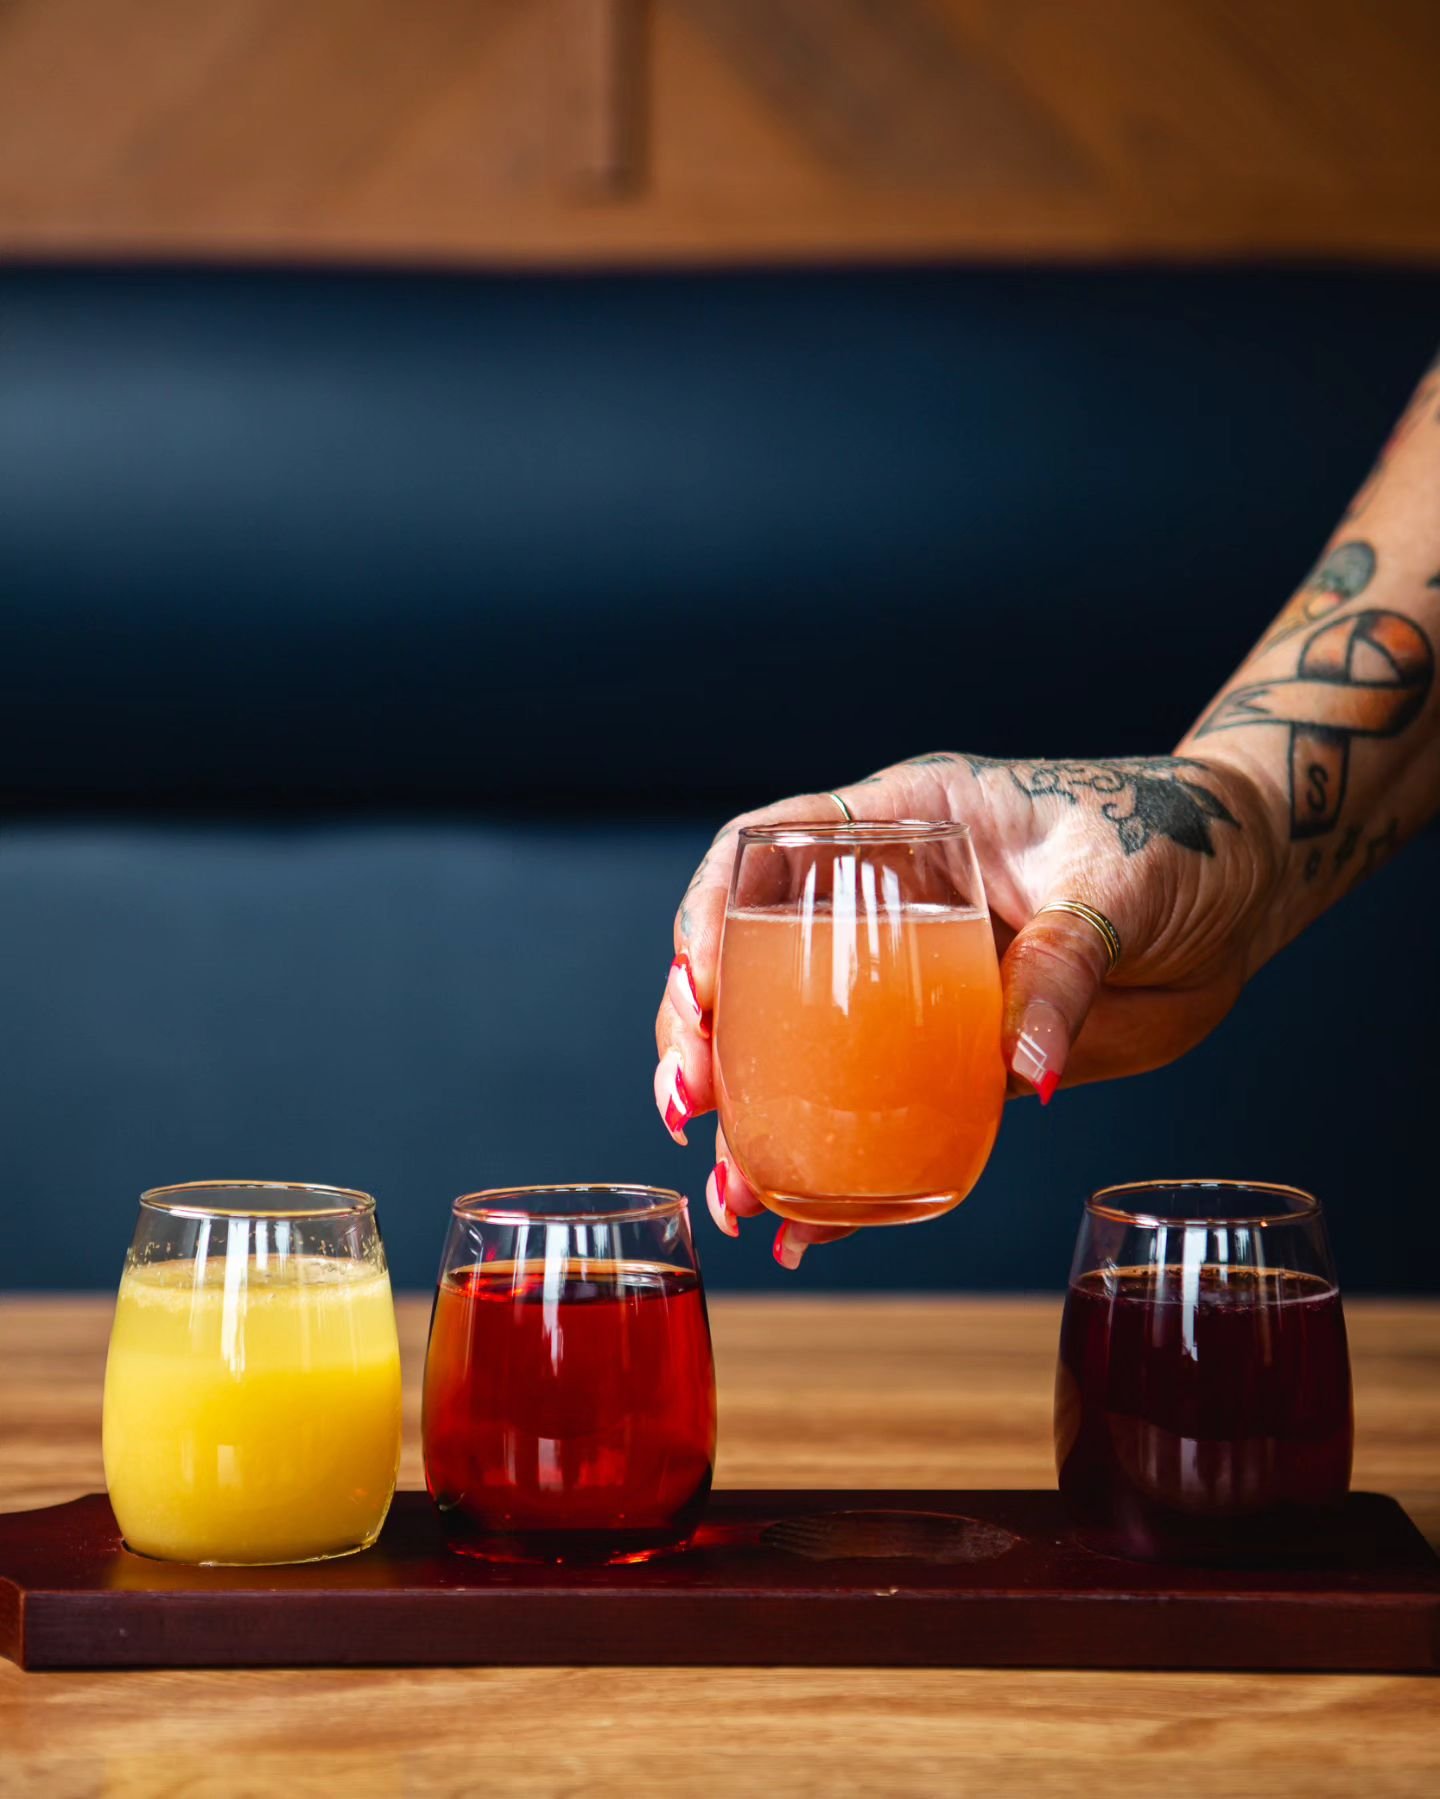 Why limit happy hour when we can have mimosas for brunch? 

Mimosa flight is now available for those that likes to try different things and it's also perfect item to share with your brunch buddies.  Hurry in and take a flight to Huckleberry Square.

